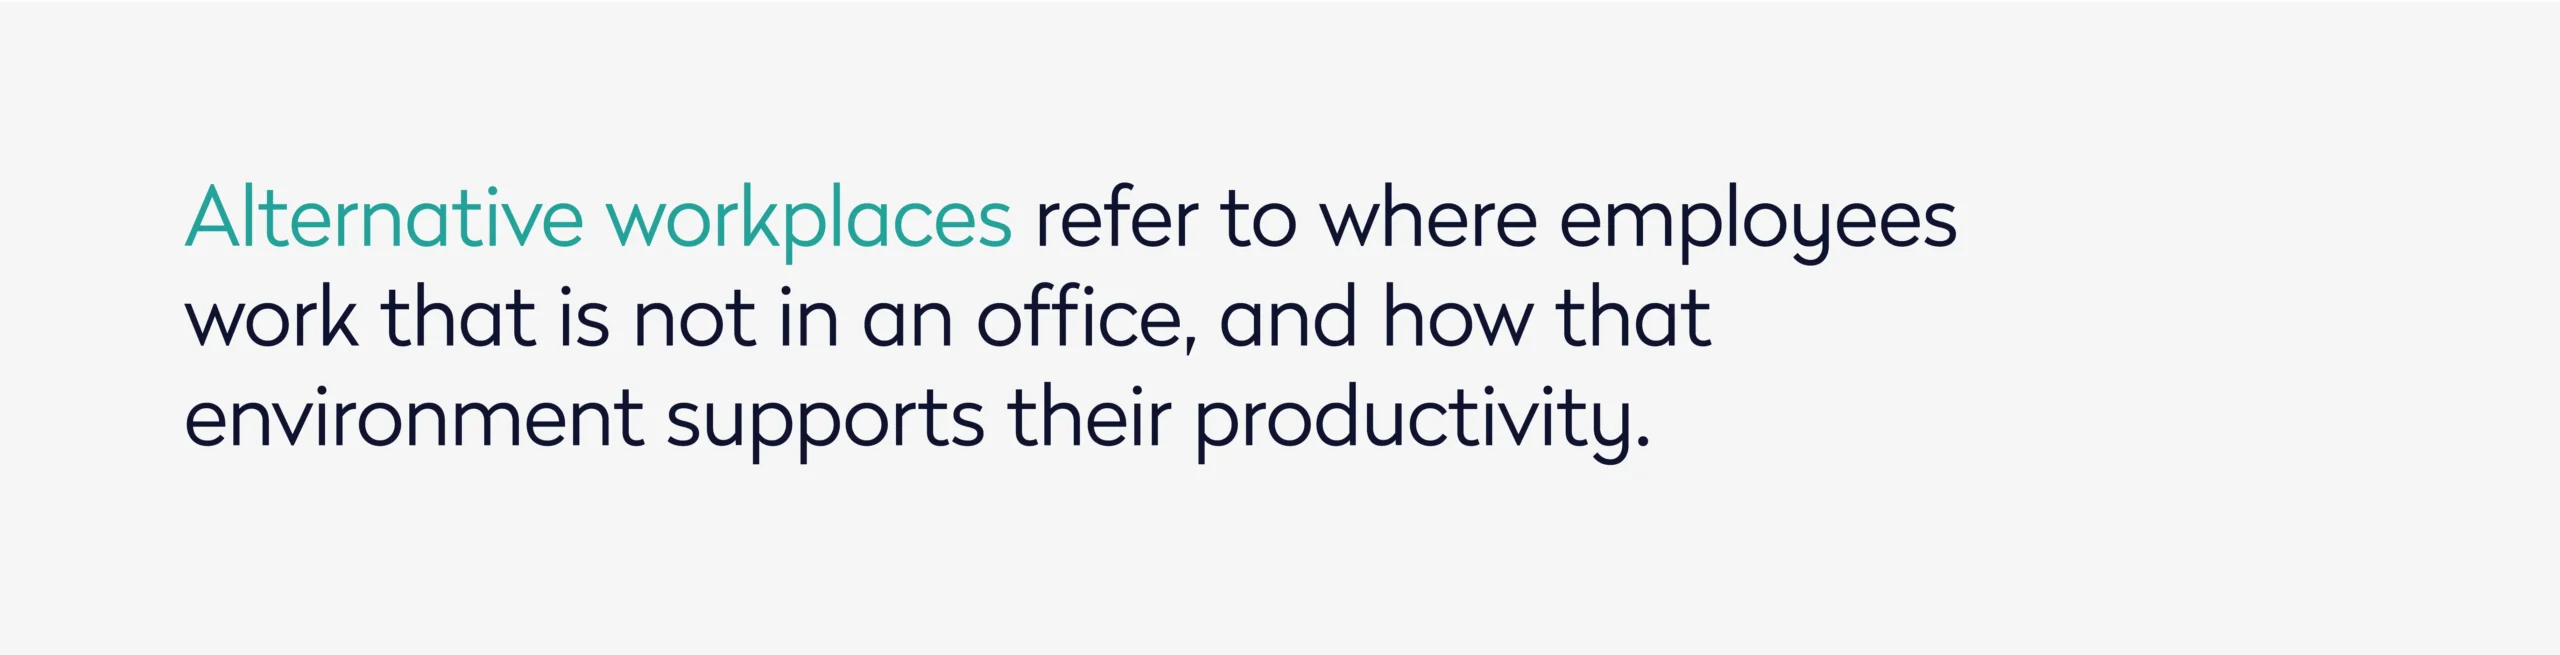 Alternative workplaces refer to where employees work that is not in an office, and how that environment supports their productivity.